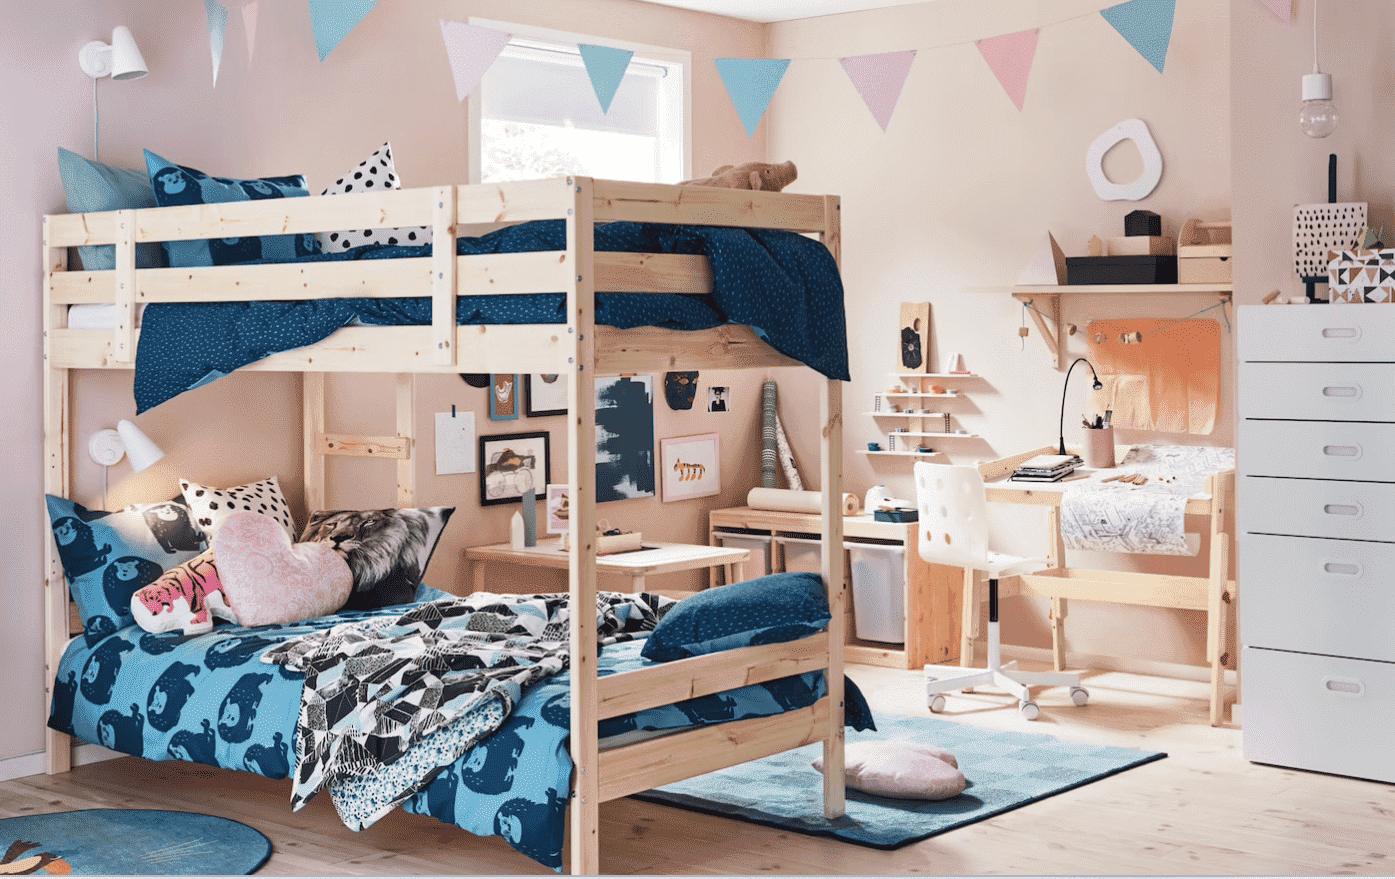 Double the Delight: Find Your Ideal Bunk Beds Configuration